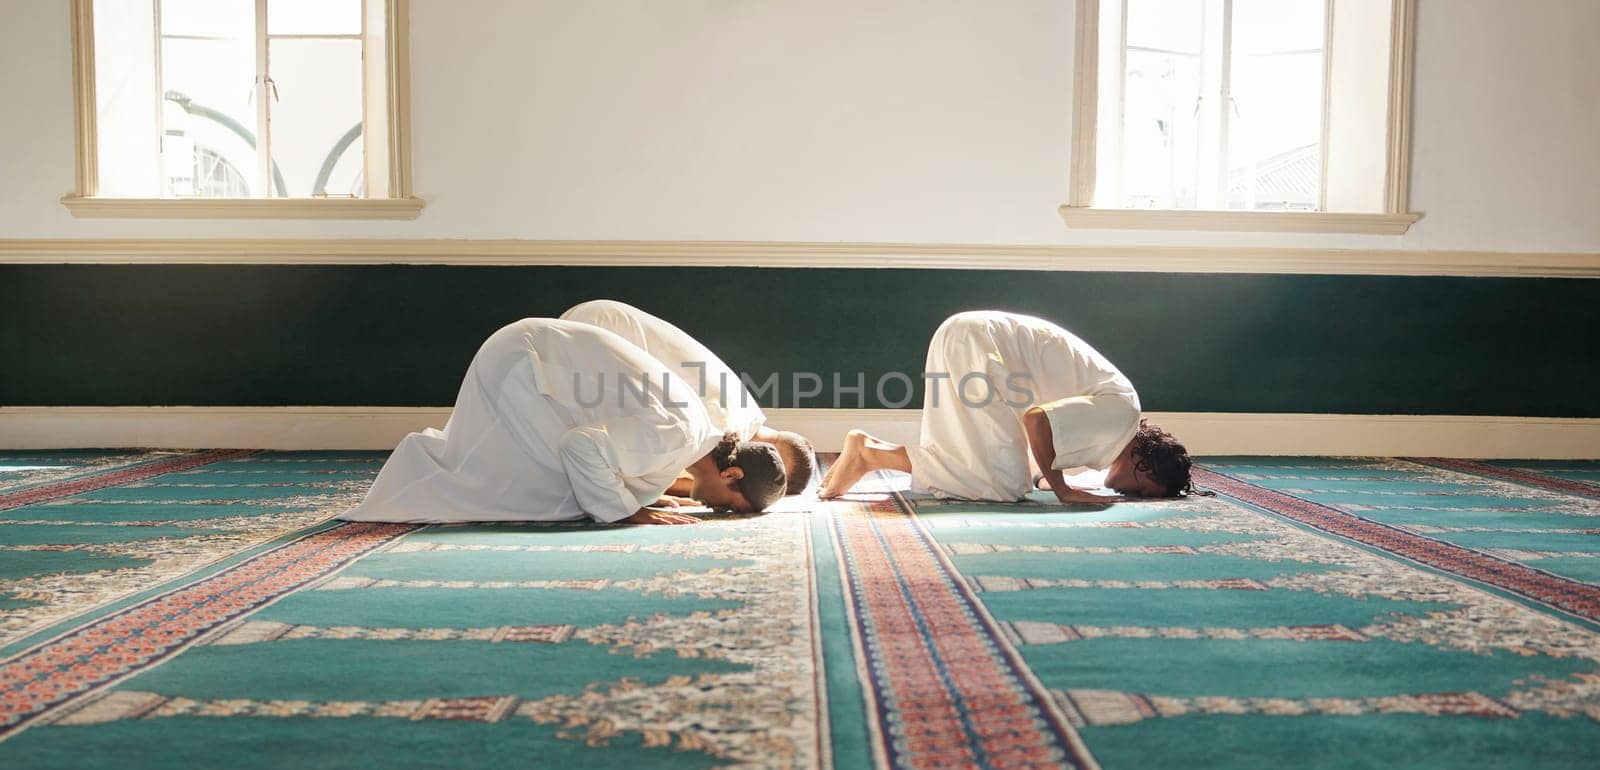 Muslim, prayer and mosque with a spiritual man group praying together during fajr, dhuhr or asr, otherwise maghrib or ishaa. Salah, worship and pray with islamic friends observing ramadan tradition.